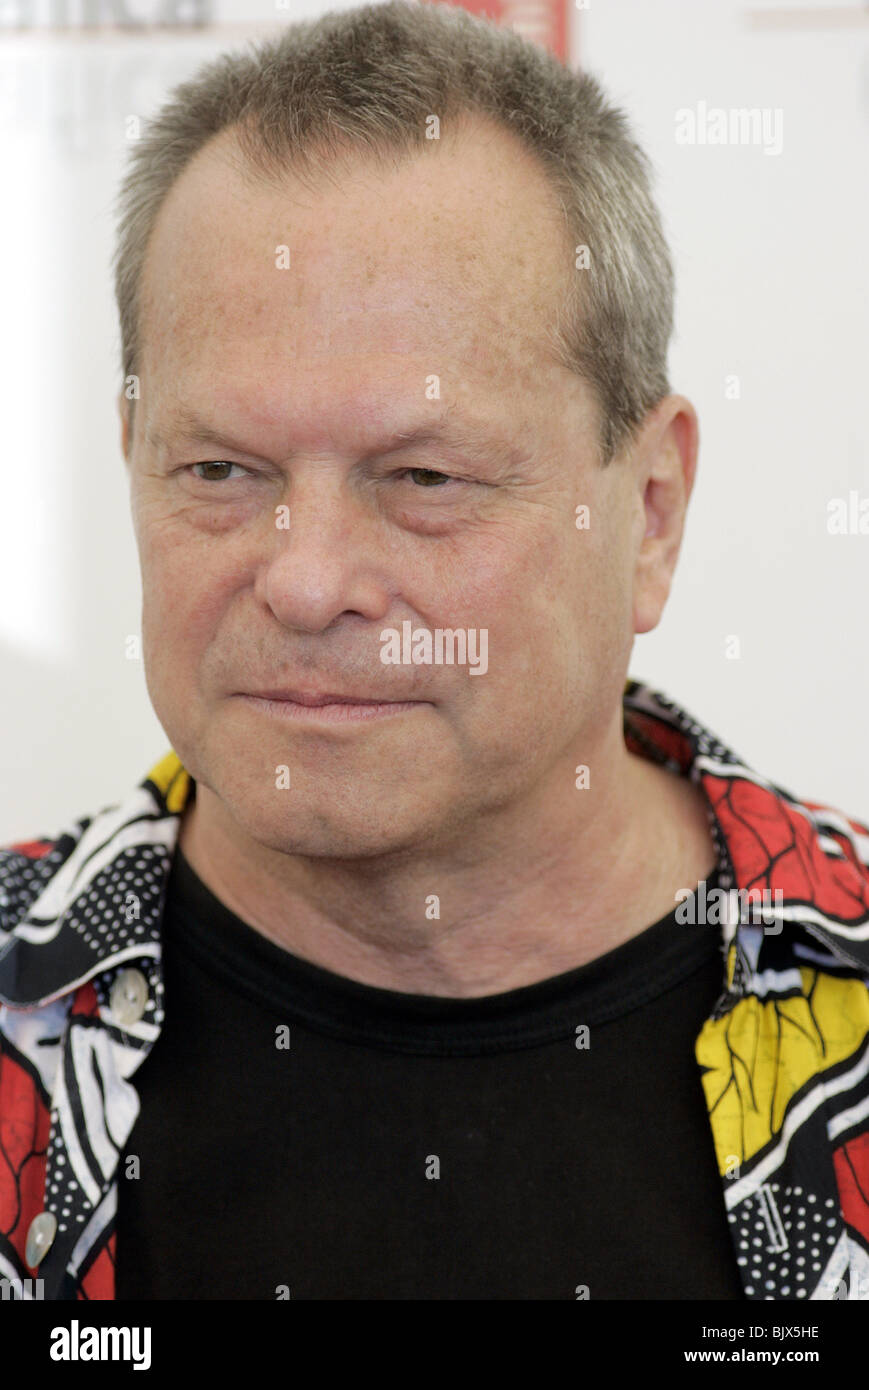 TERRY GILLIAM THE BROTHERS GRIMM PHOTOCALL. CASINO LIDO VENICE ITALY 04 September 2005 Stock Photo